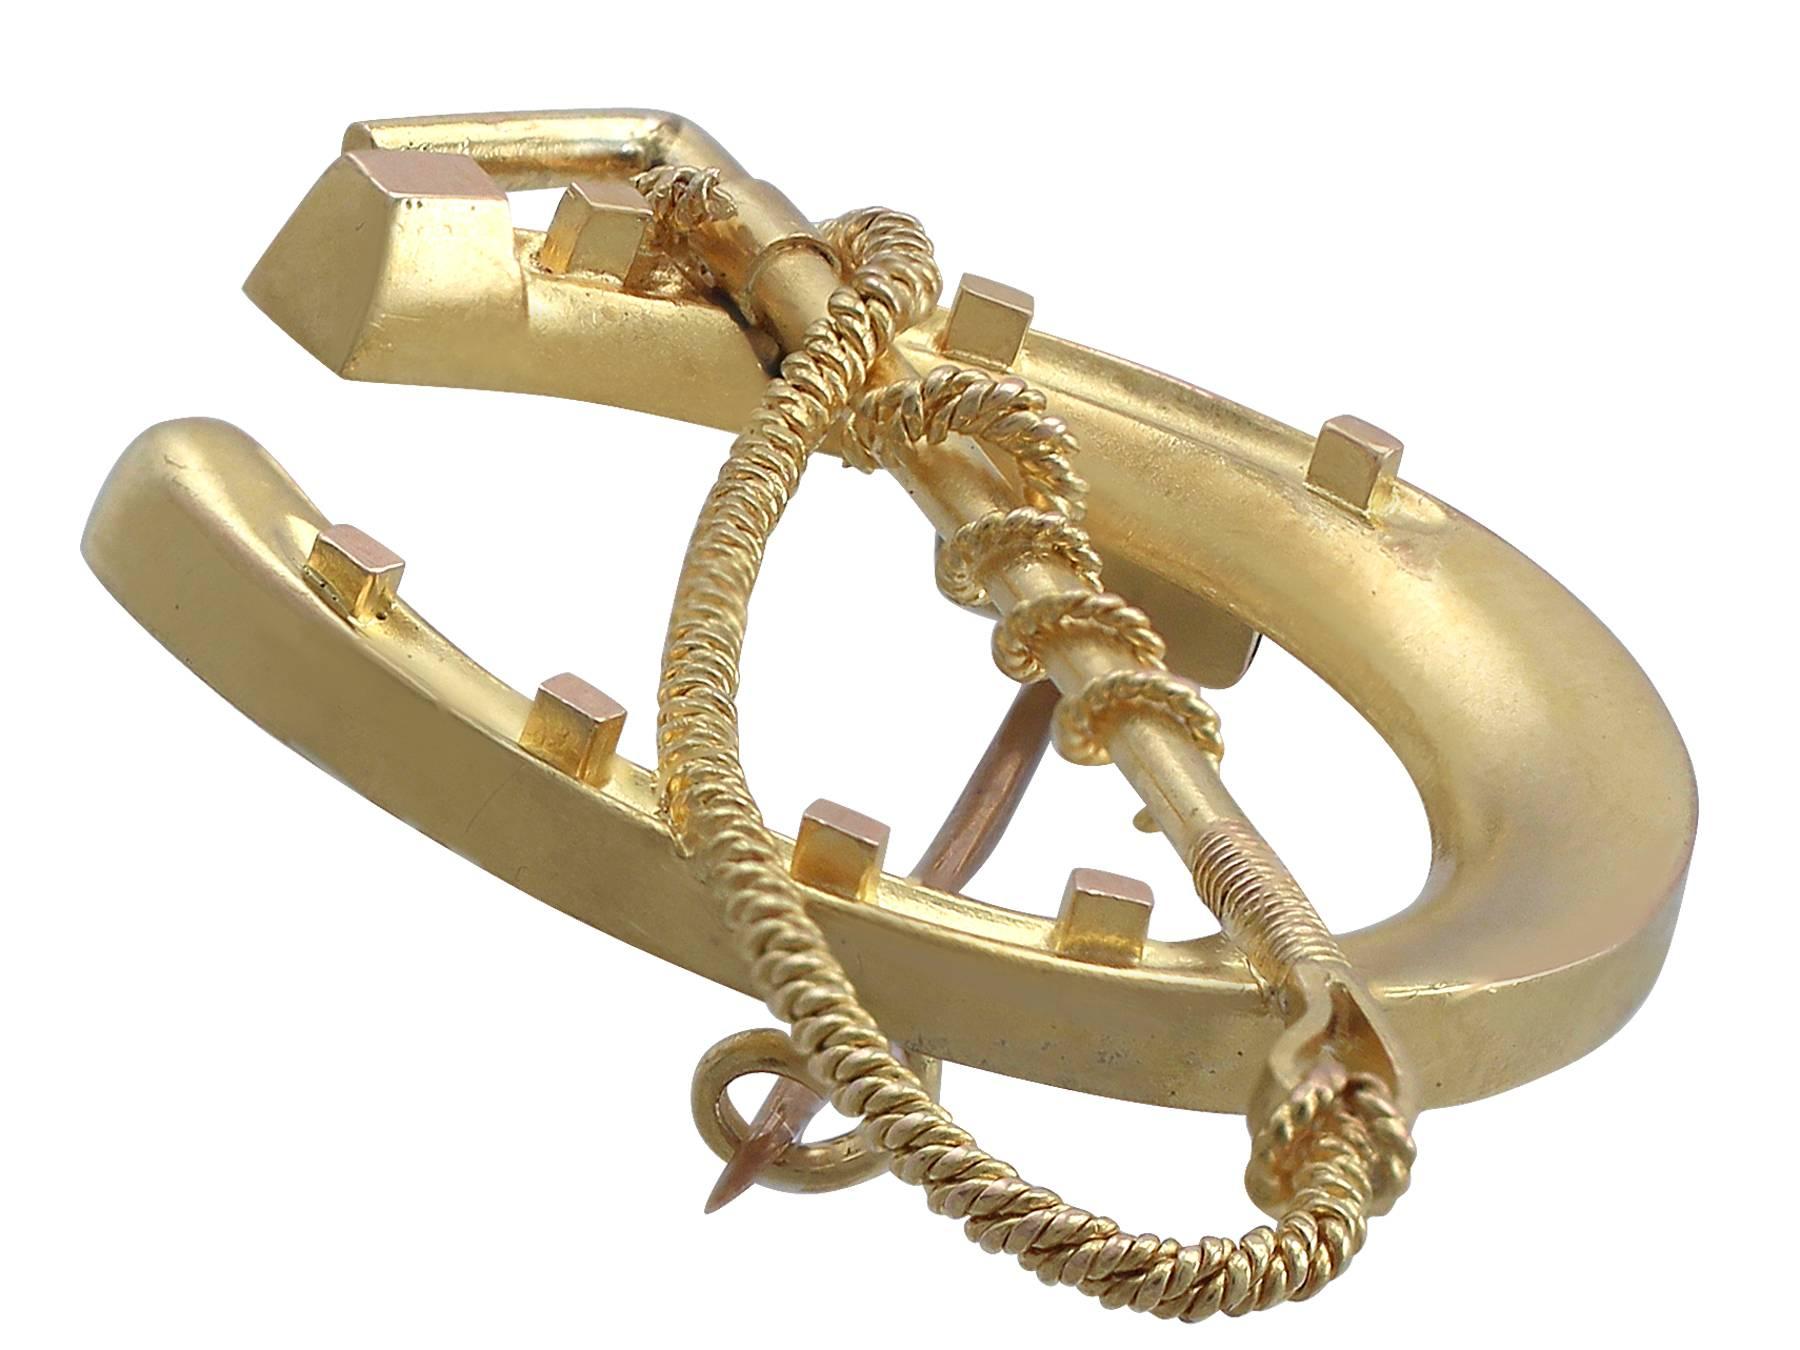 An impressive antique Victorian 15 karat yellow gold 'horseshoe and crop' brooch; part of our diverse antique jewelry and estate jewelry collections

This fine and impressive antique horseshoe brooch has been crafted in 15k yellow gold.

The brooch